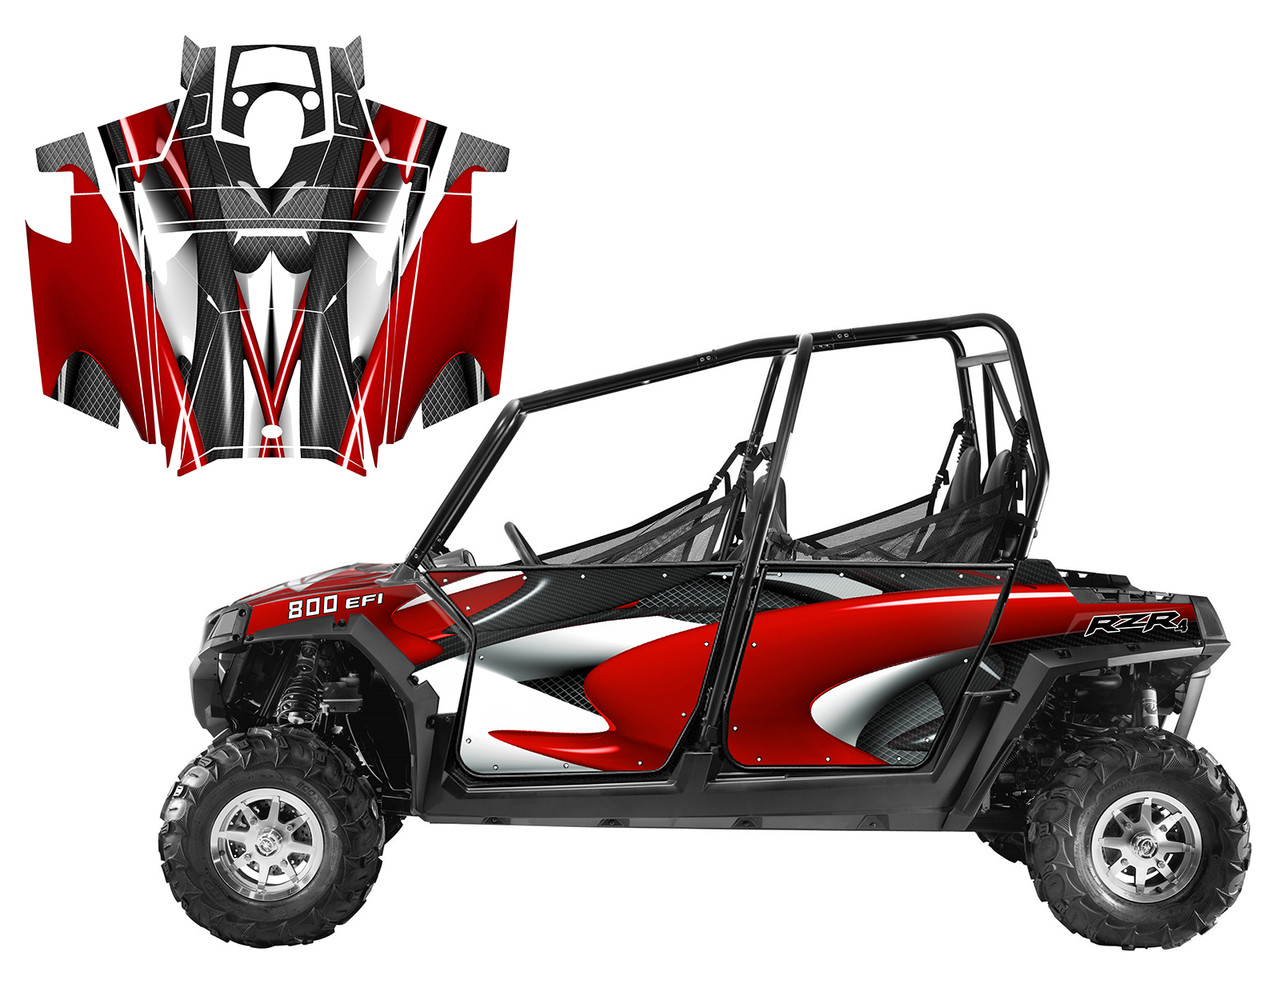 2014 RZR 4 800s graphics decal kit design #1533RED